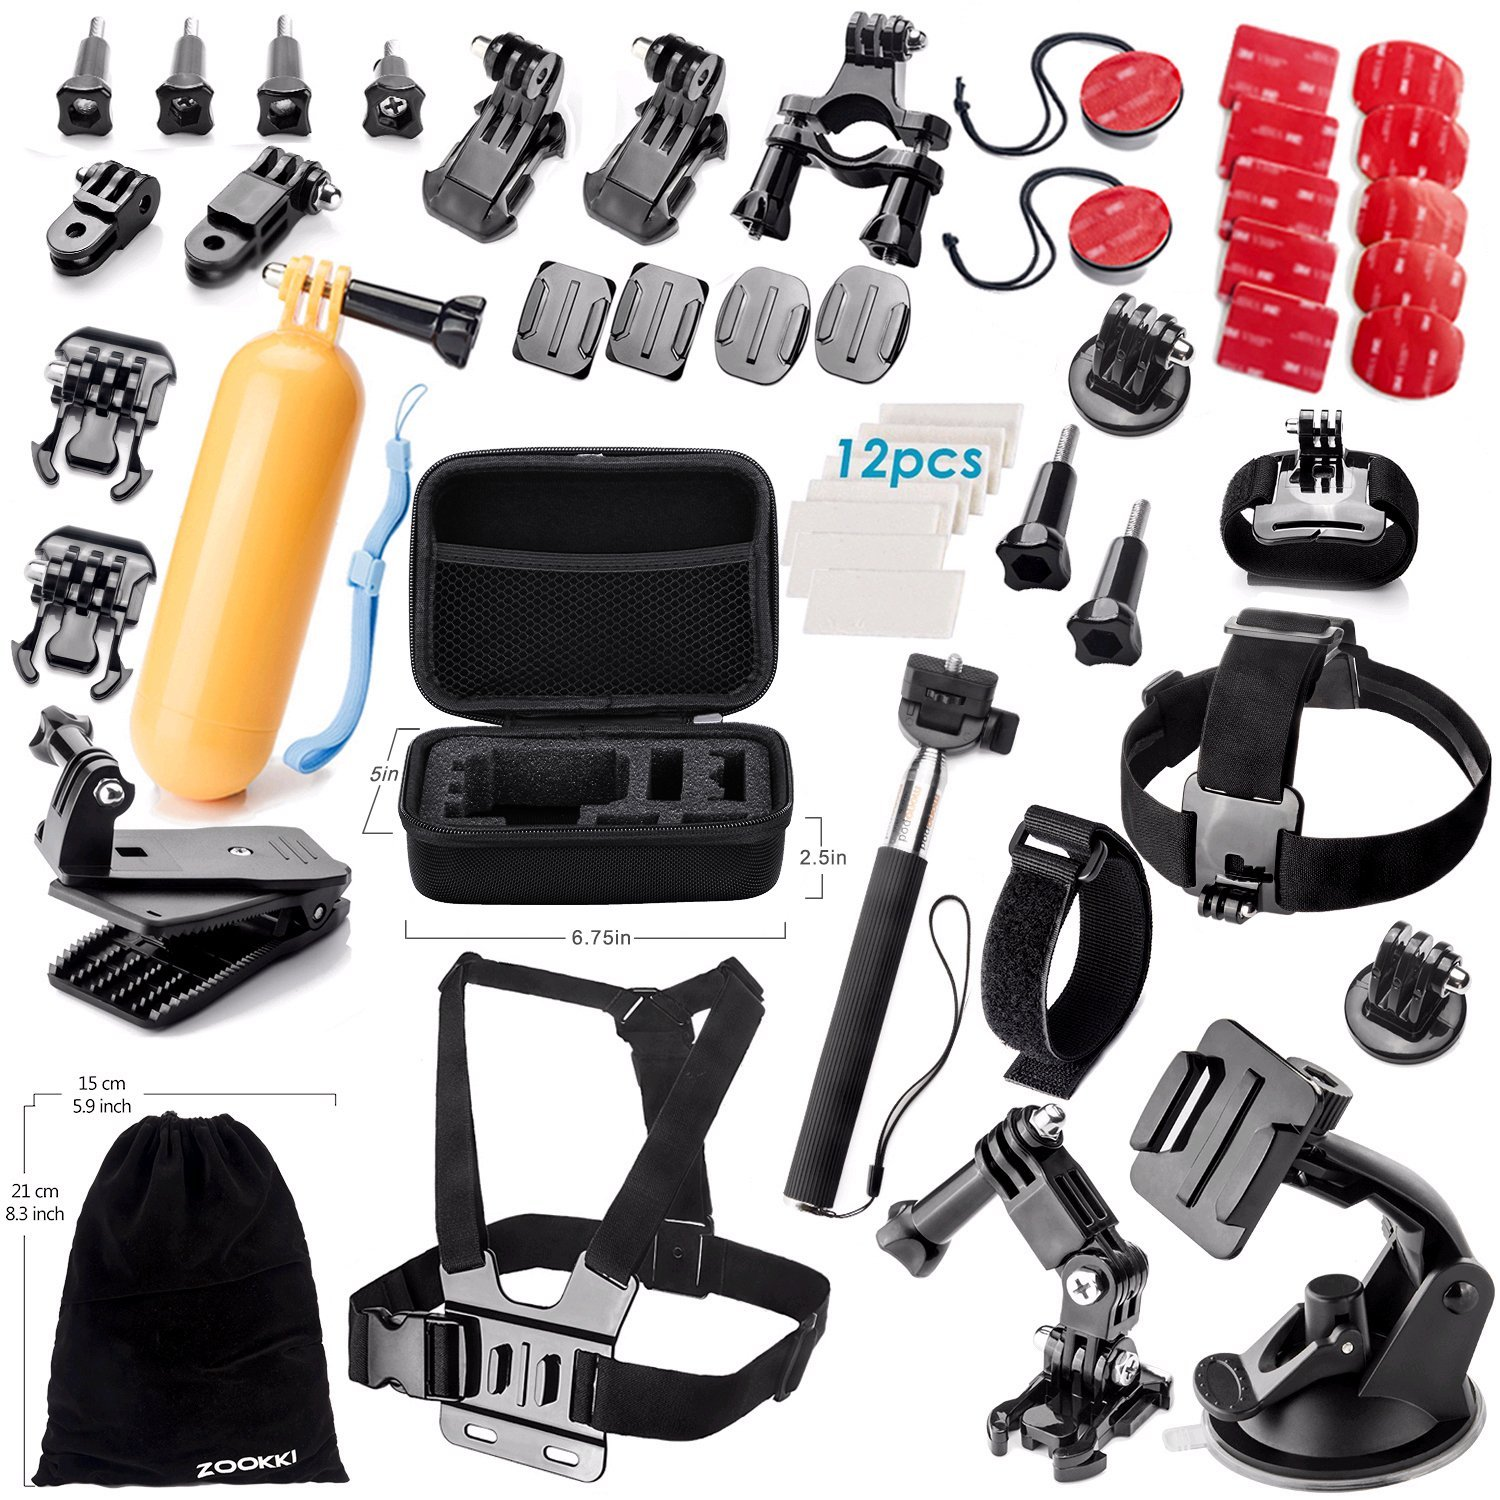 Accessories Kit for GoPro Hero 5 4 3+ 3 2 1 Only $8.80 with Great Reviews!